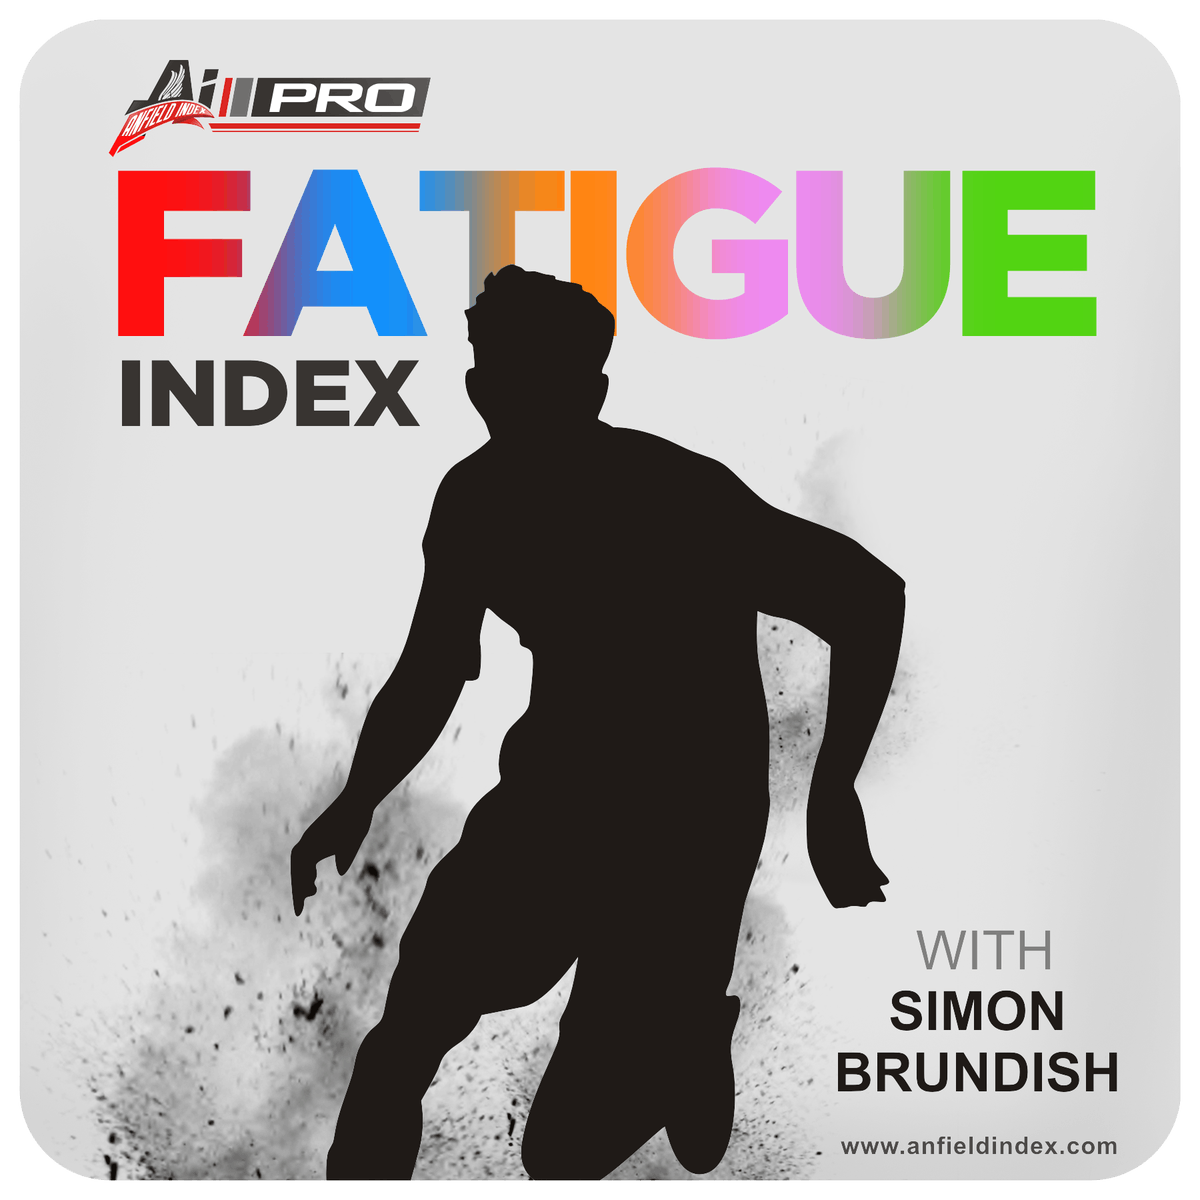 Right Size of Footballer? - Fatigue Index